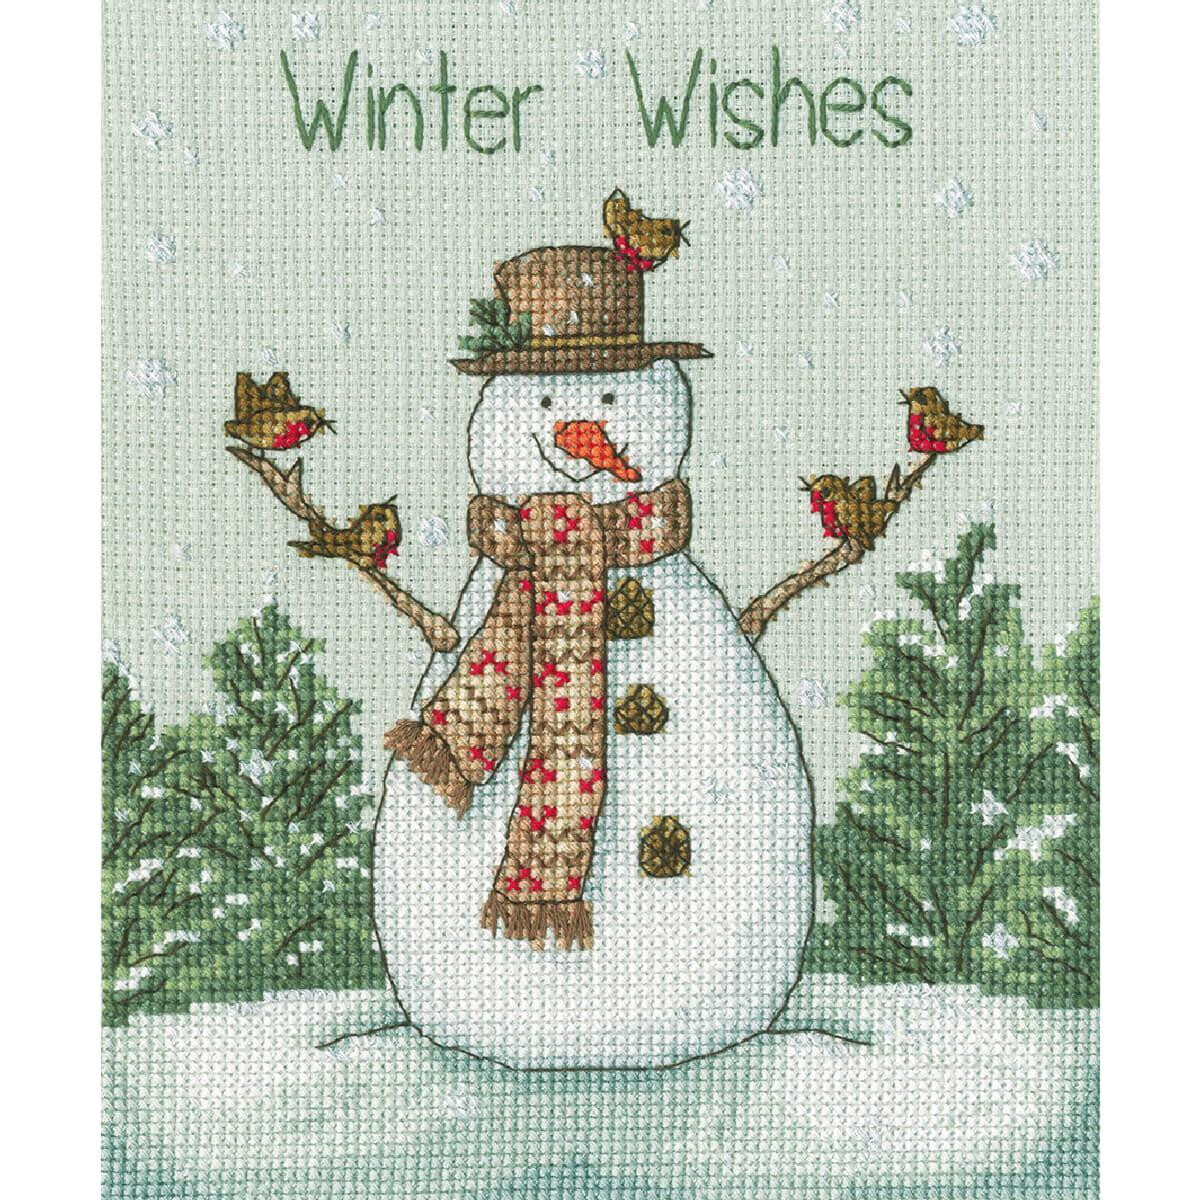 A cross-stitch picture of a snowman with a brown hat and...